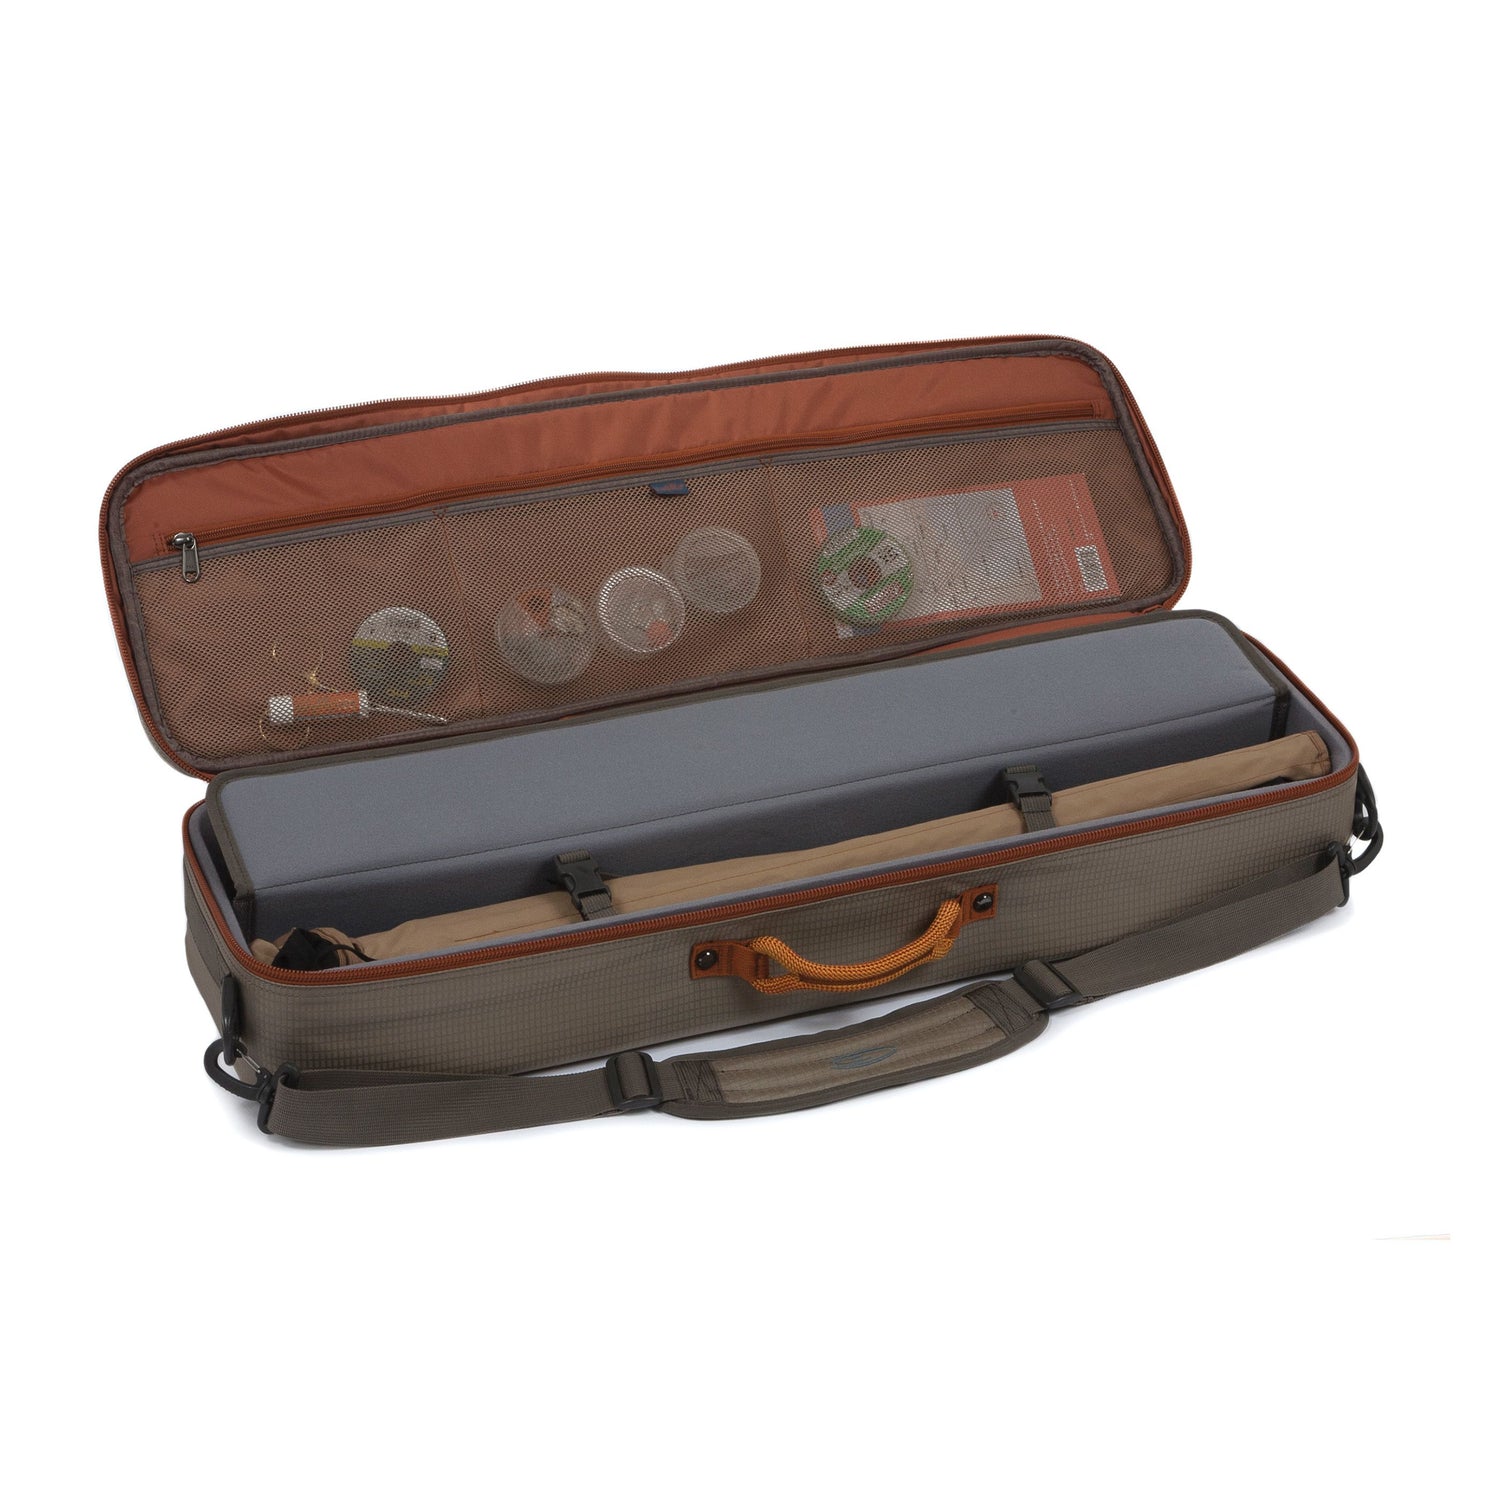 Rods reels and couple travel cases